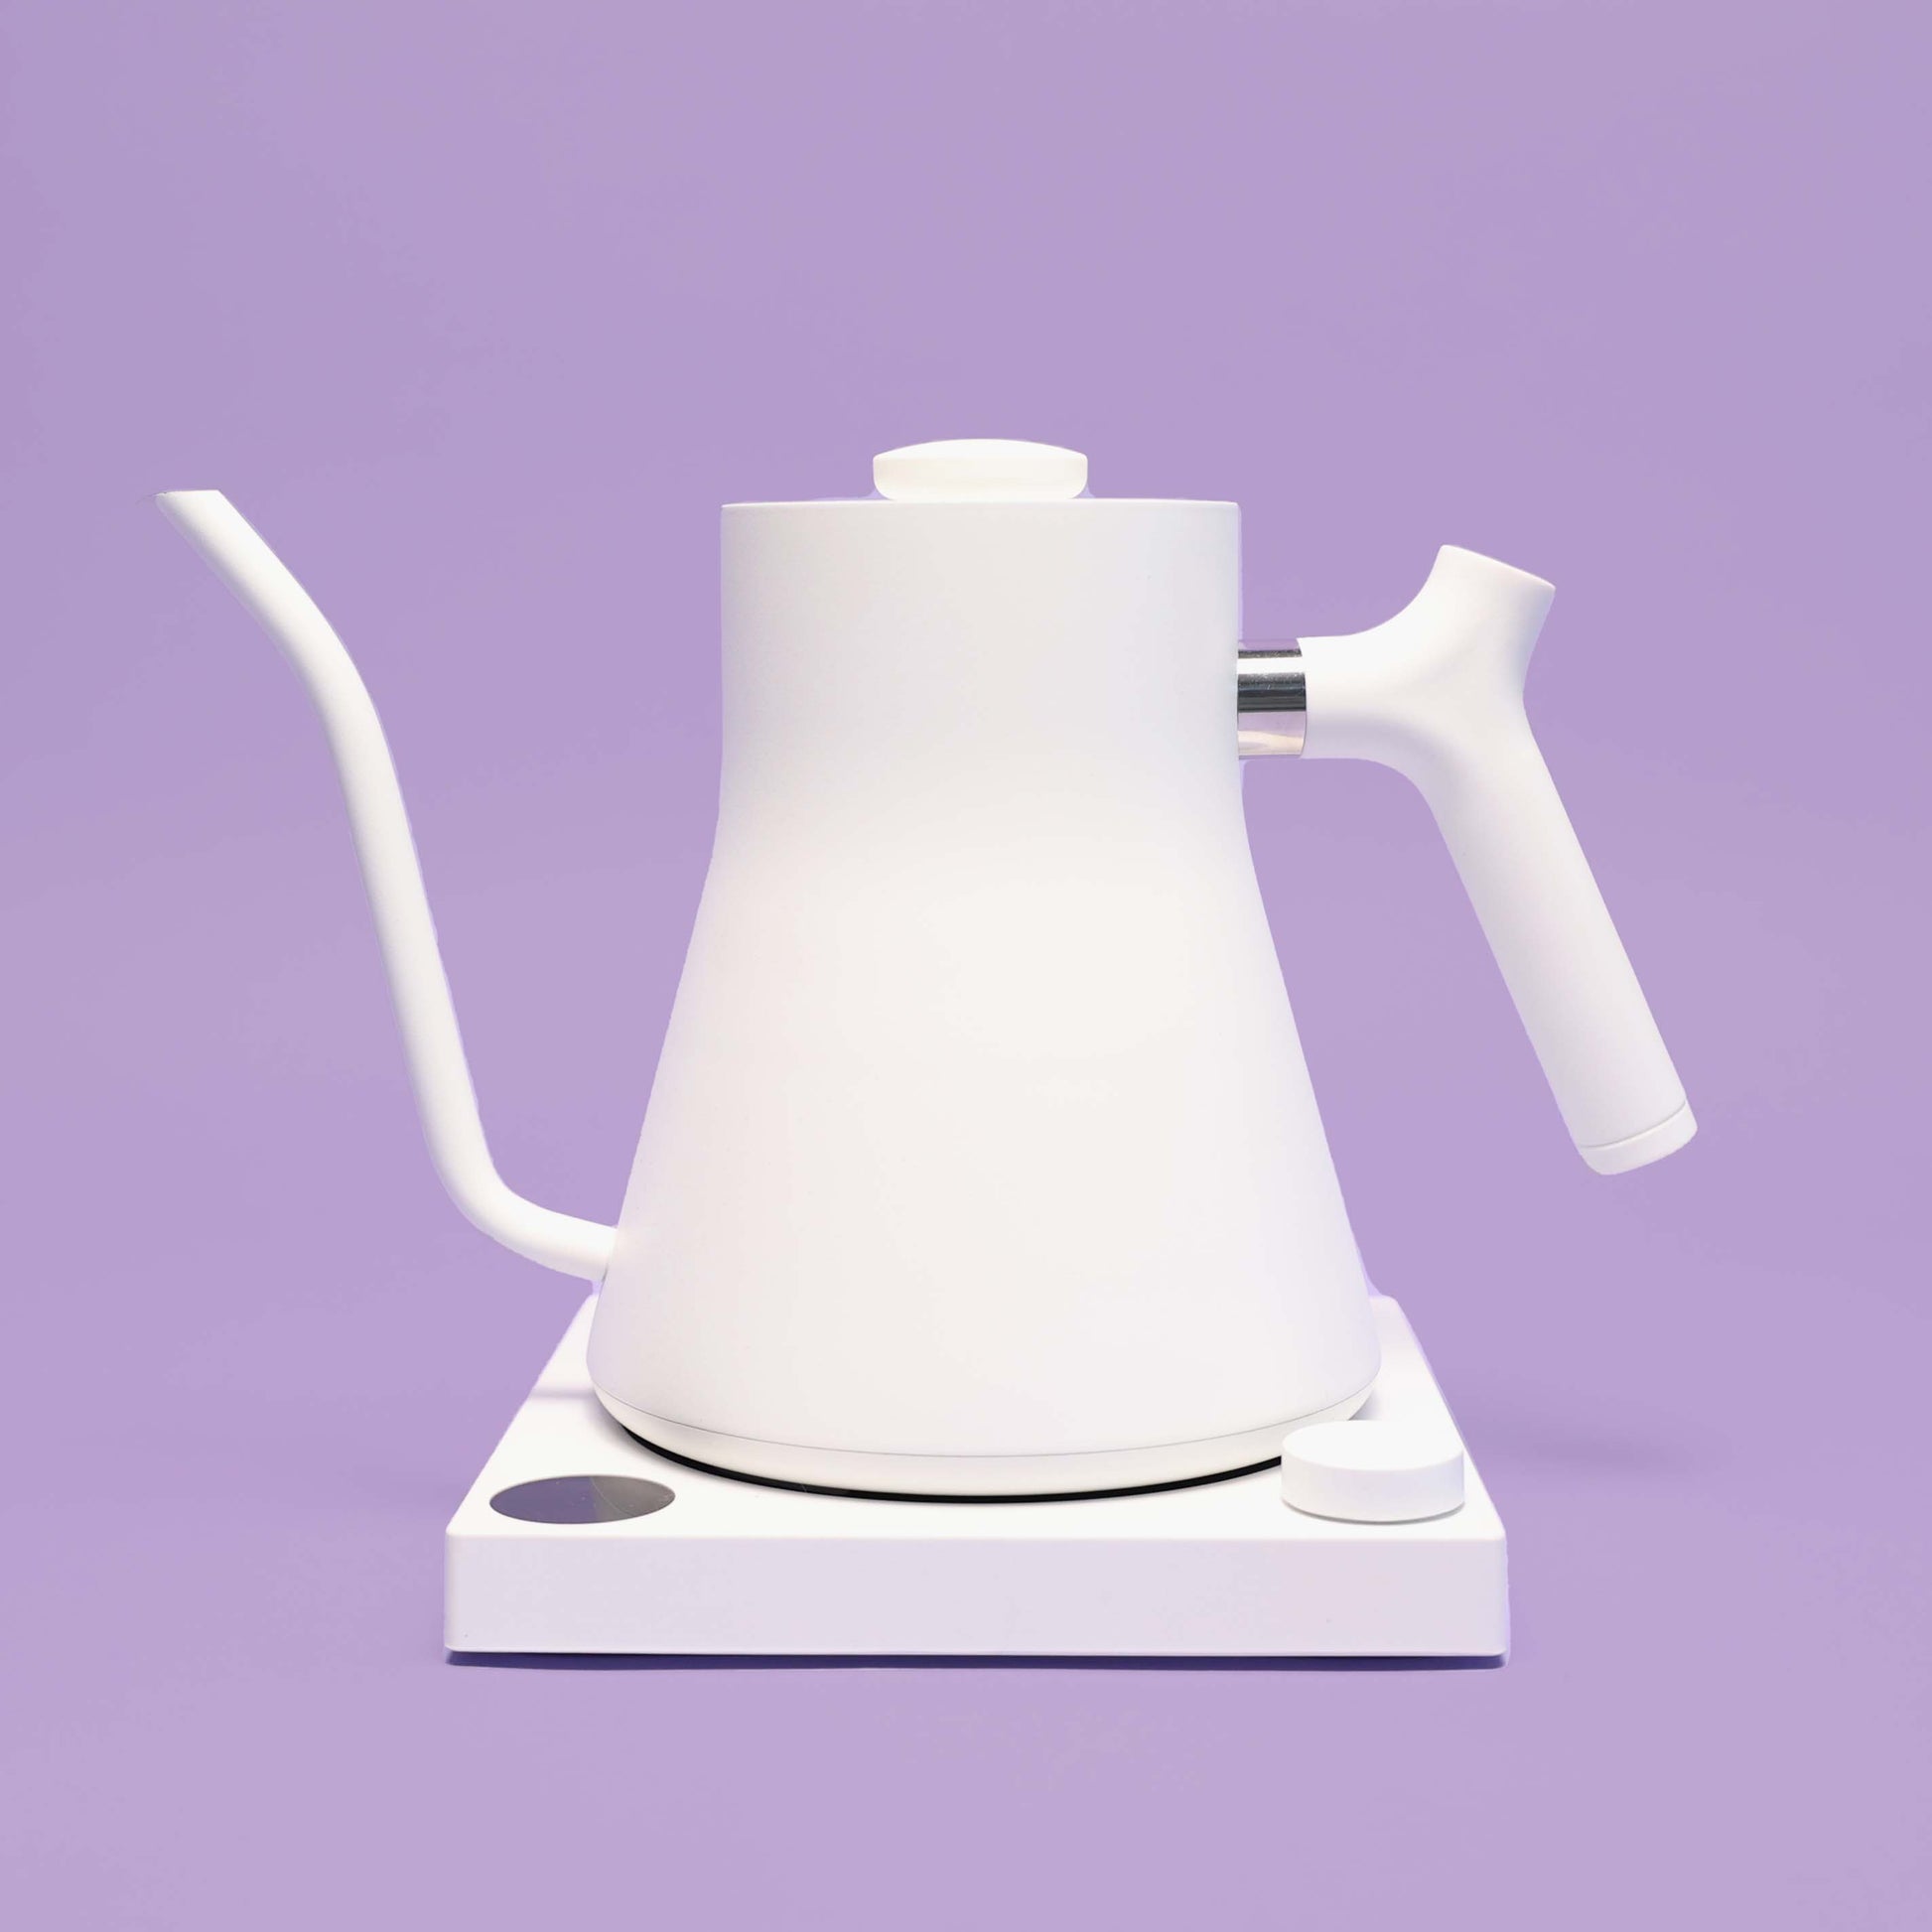 Stagg Ekg Electric Kettle, Kettles Electric Fellow